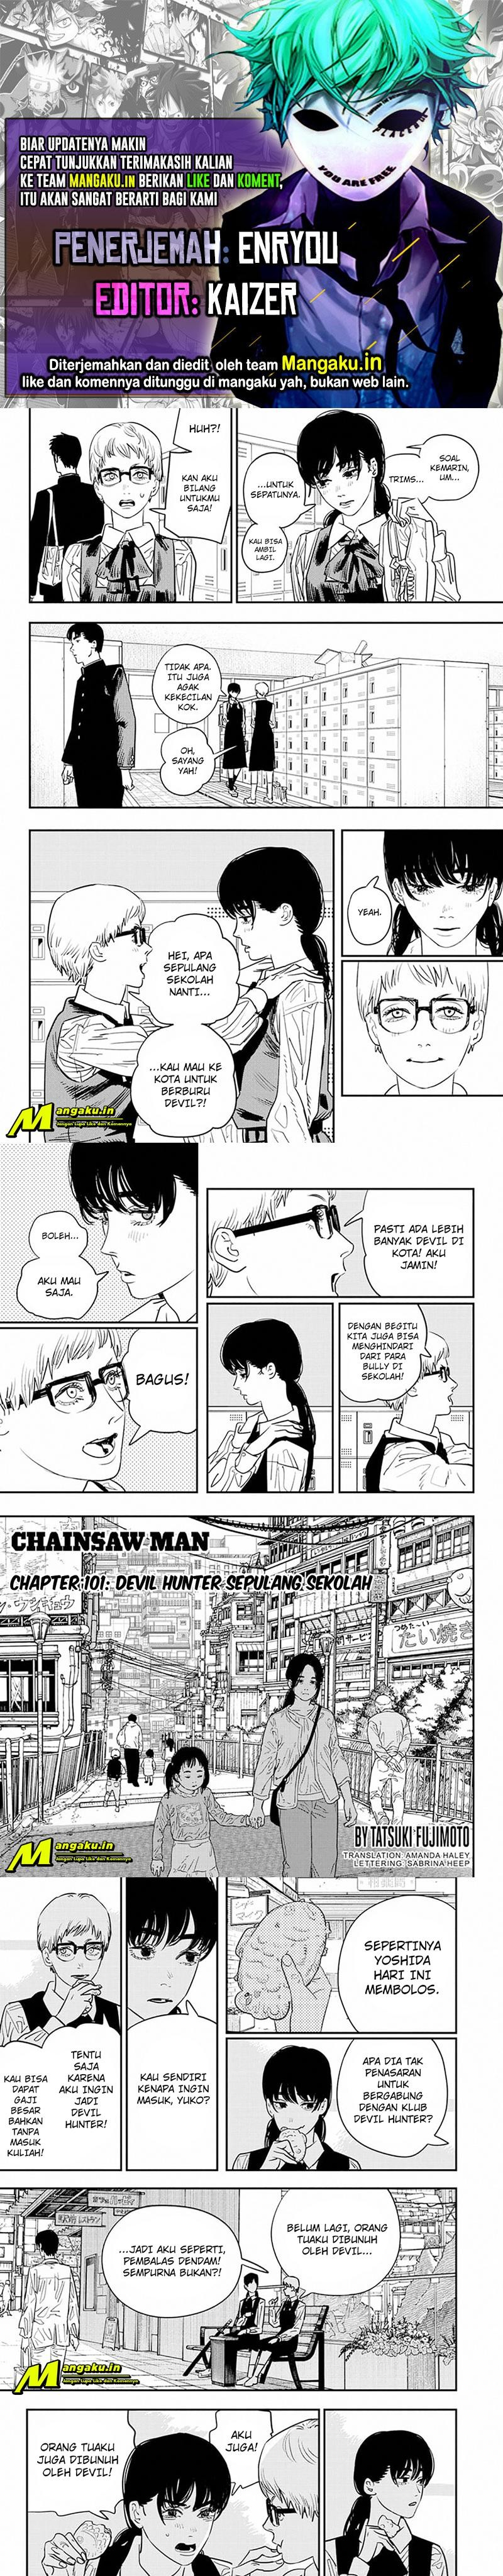 Chainsaw Man Chapter 101 1